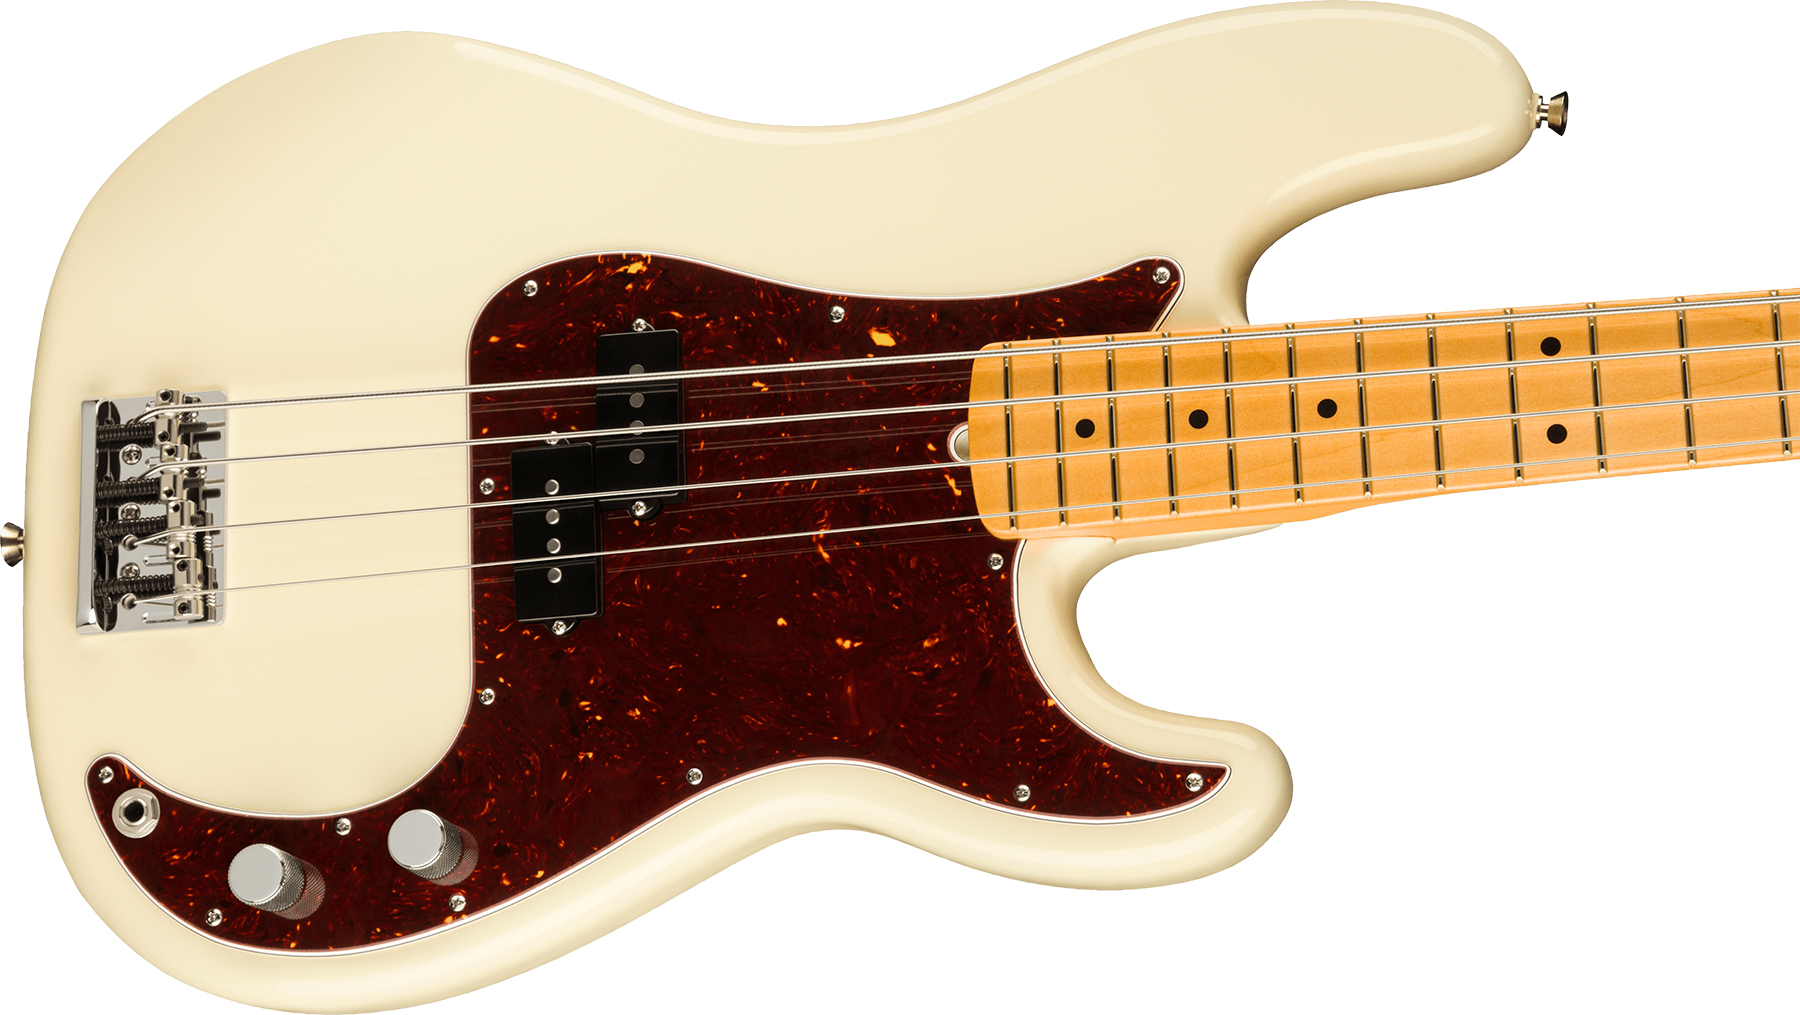 Fender Precision Bass American Professional Ii Usa Mn - Olympic White - Basse Électrique Solid Body - Variation 2